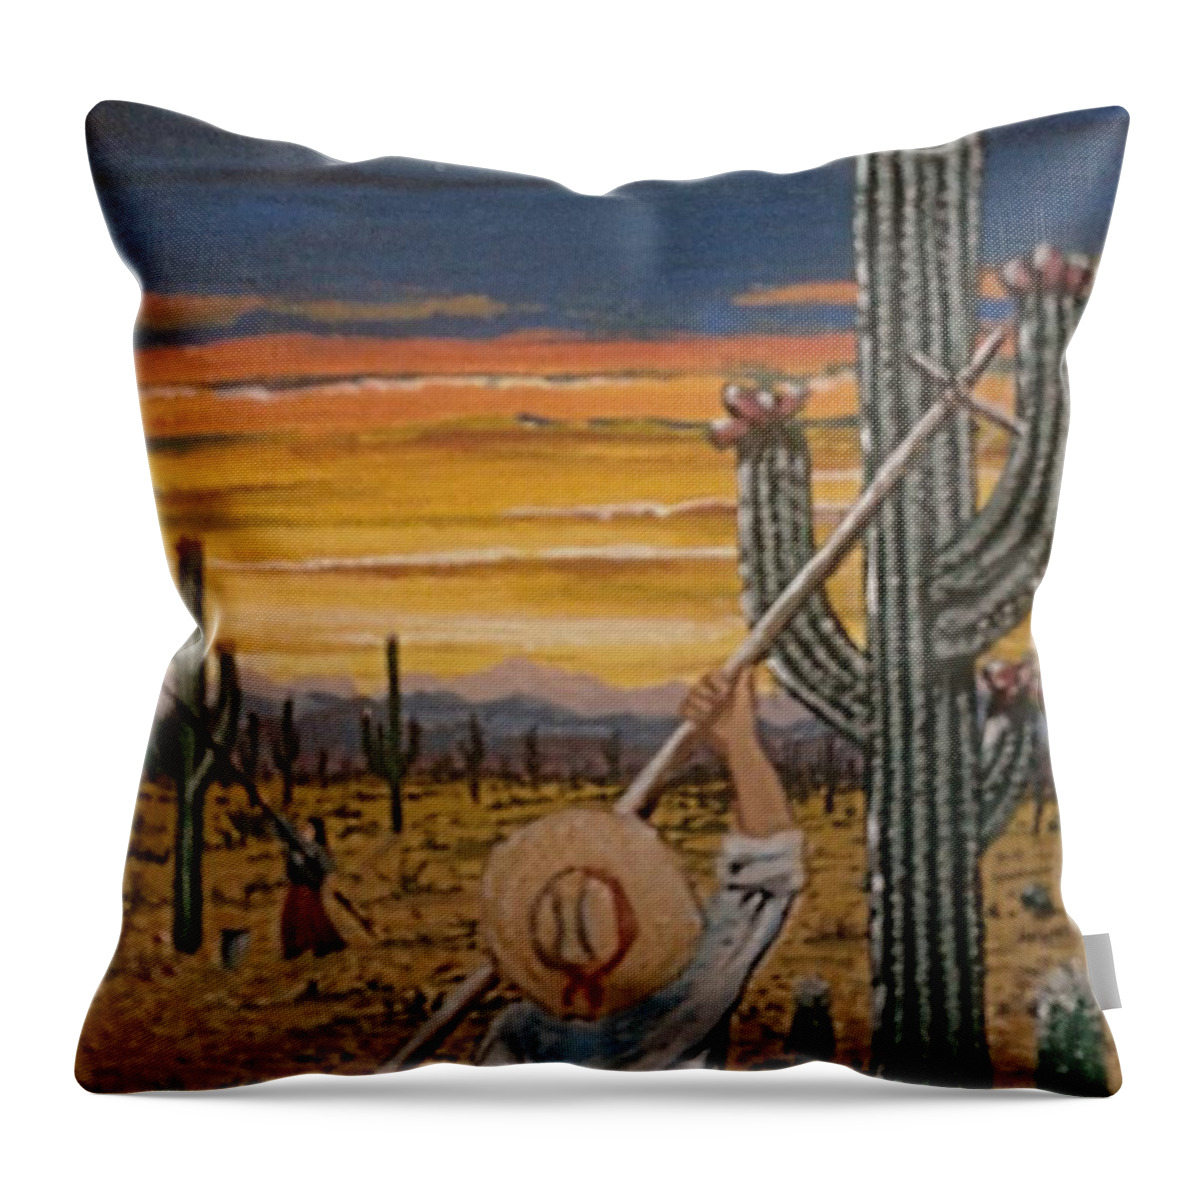  Throw Pillow featuring the painting Harvesting by James RODERICK